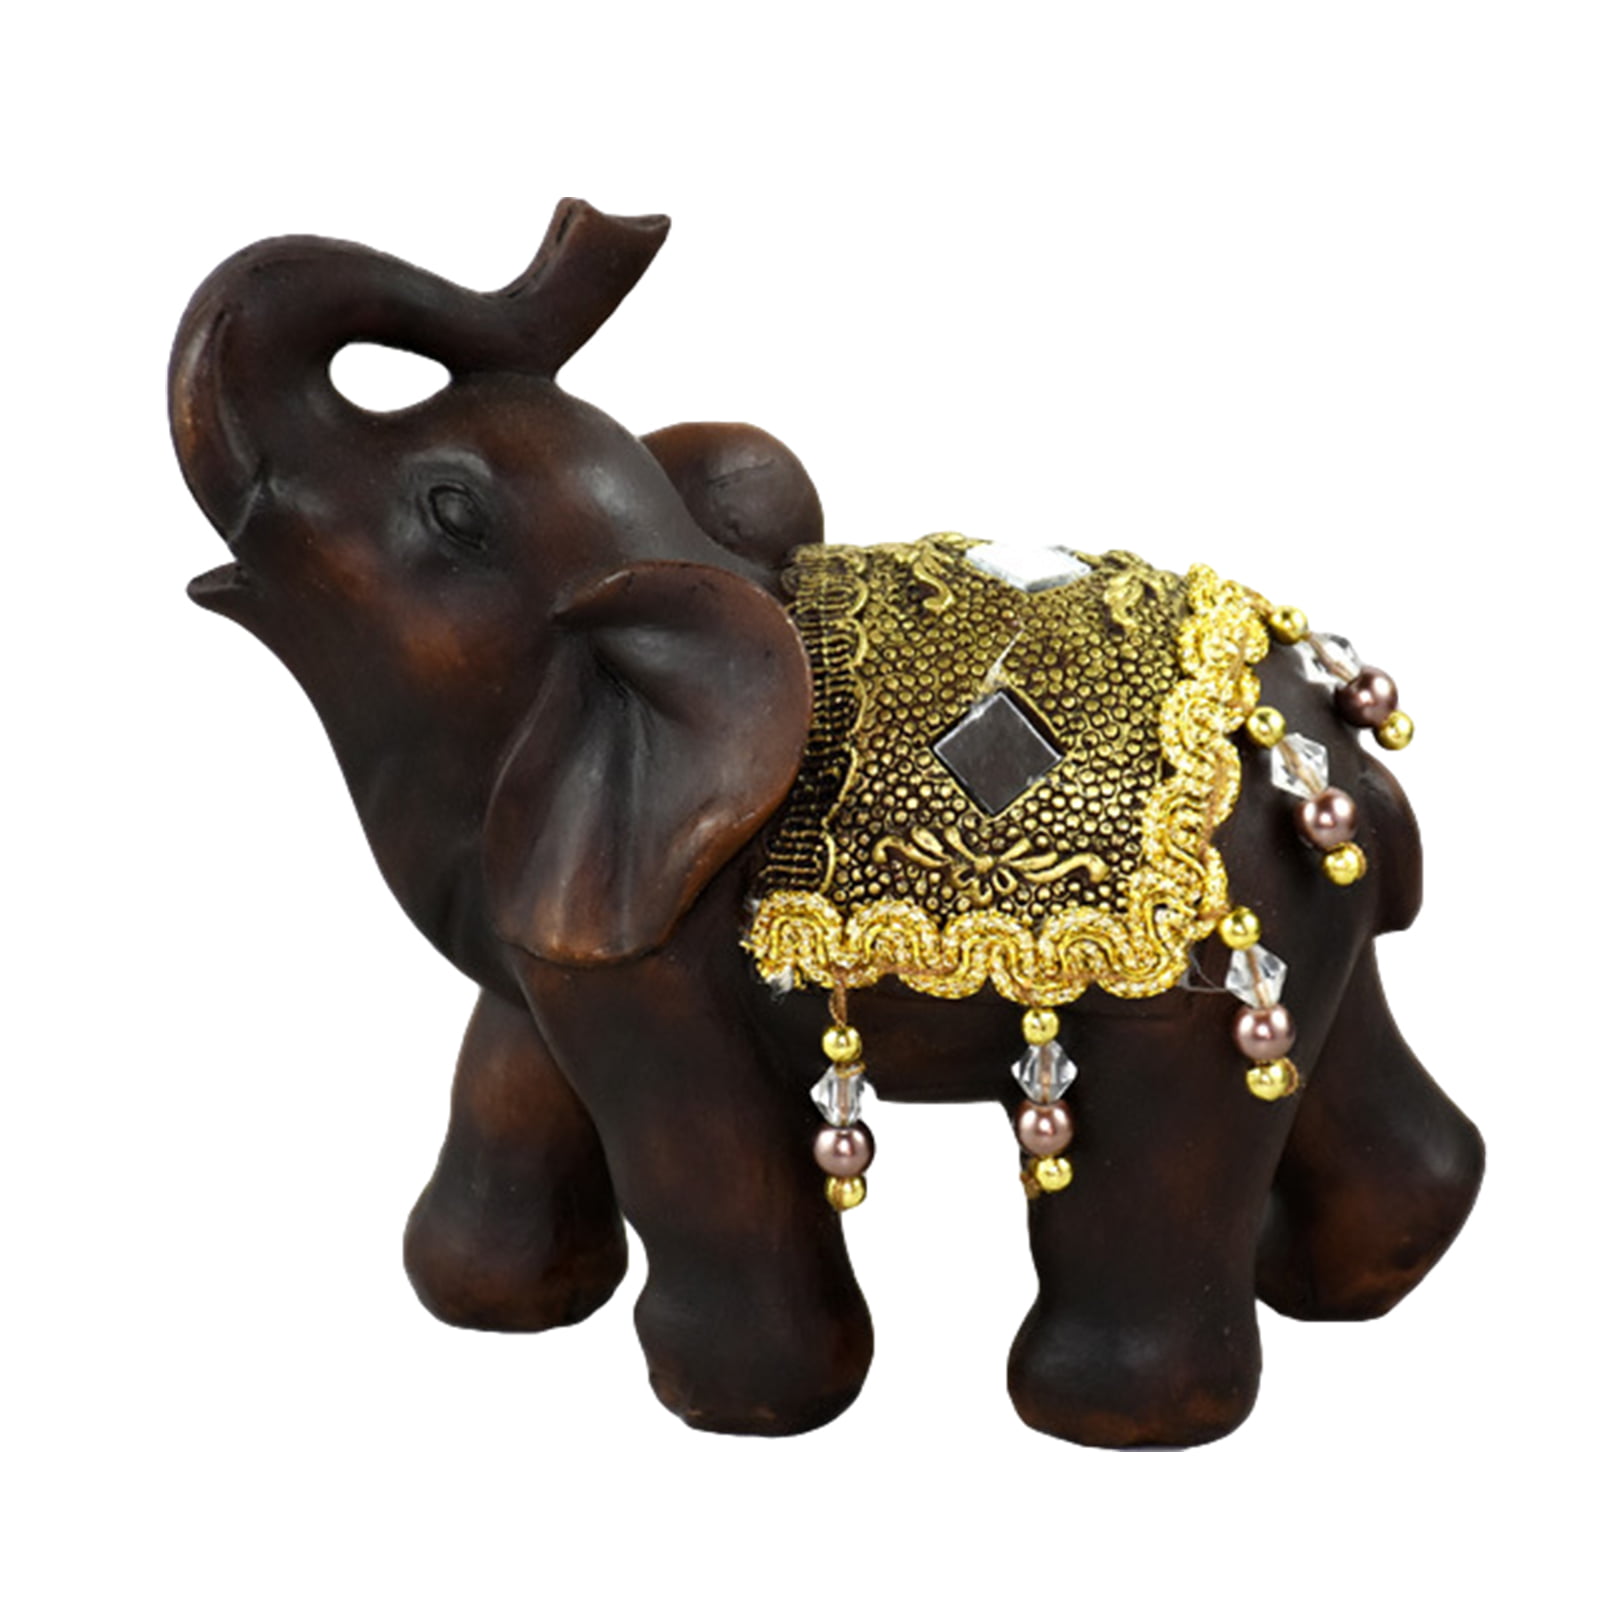 1X Wooden Carving Boutique Decor Blessing Elephant Arts And Crafts Statue Lucky 